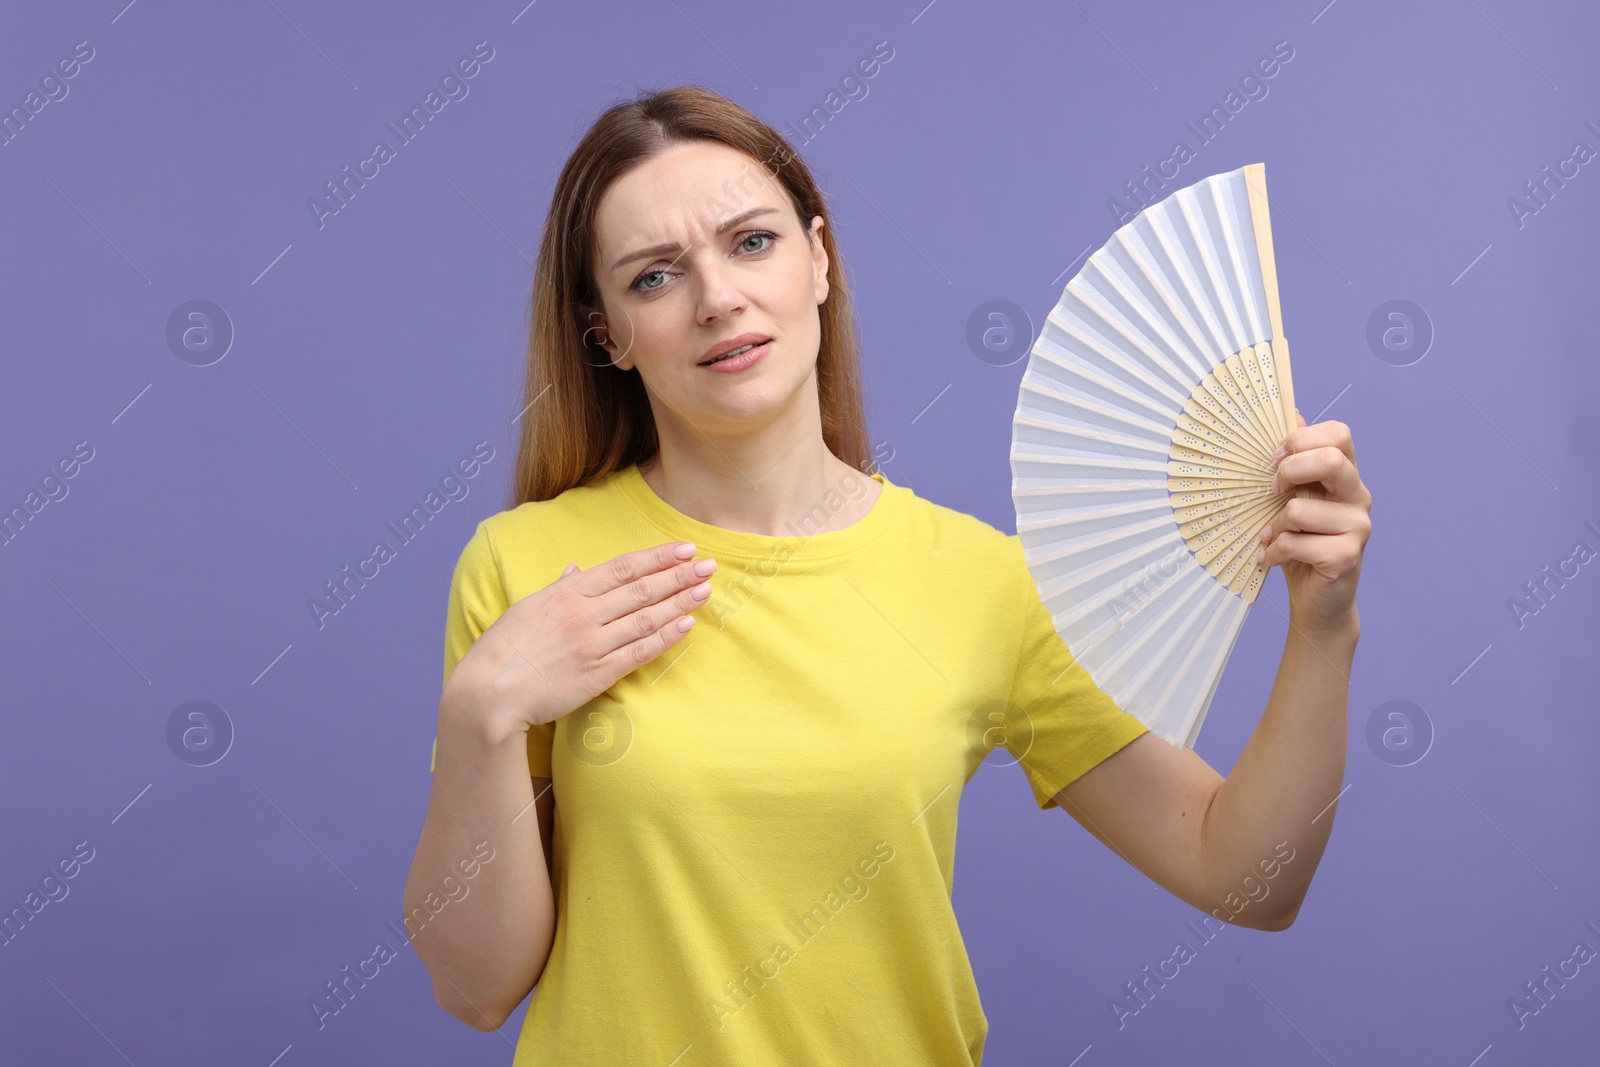 Photo of Beautiful woman waving hand fan to cool herself on violet background